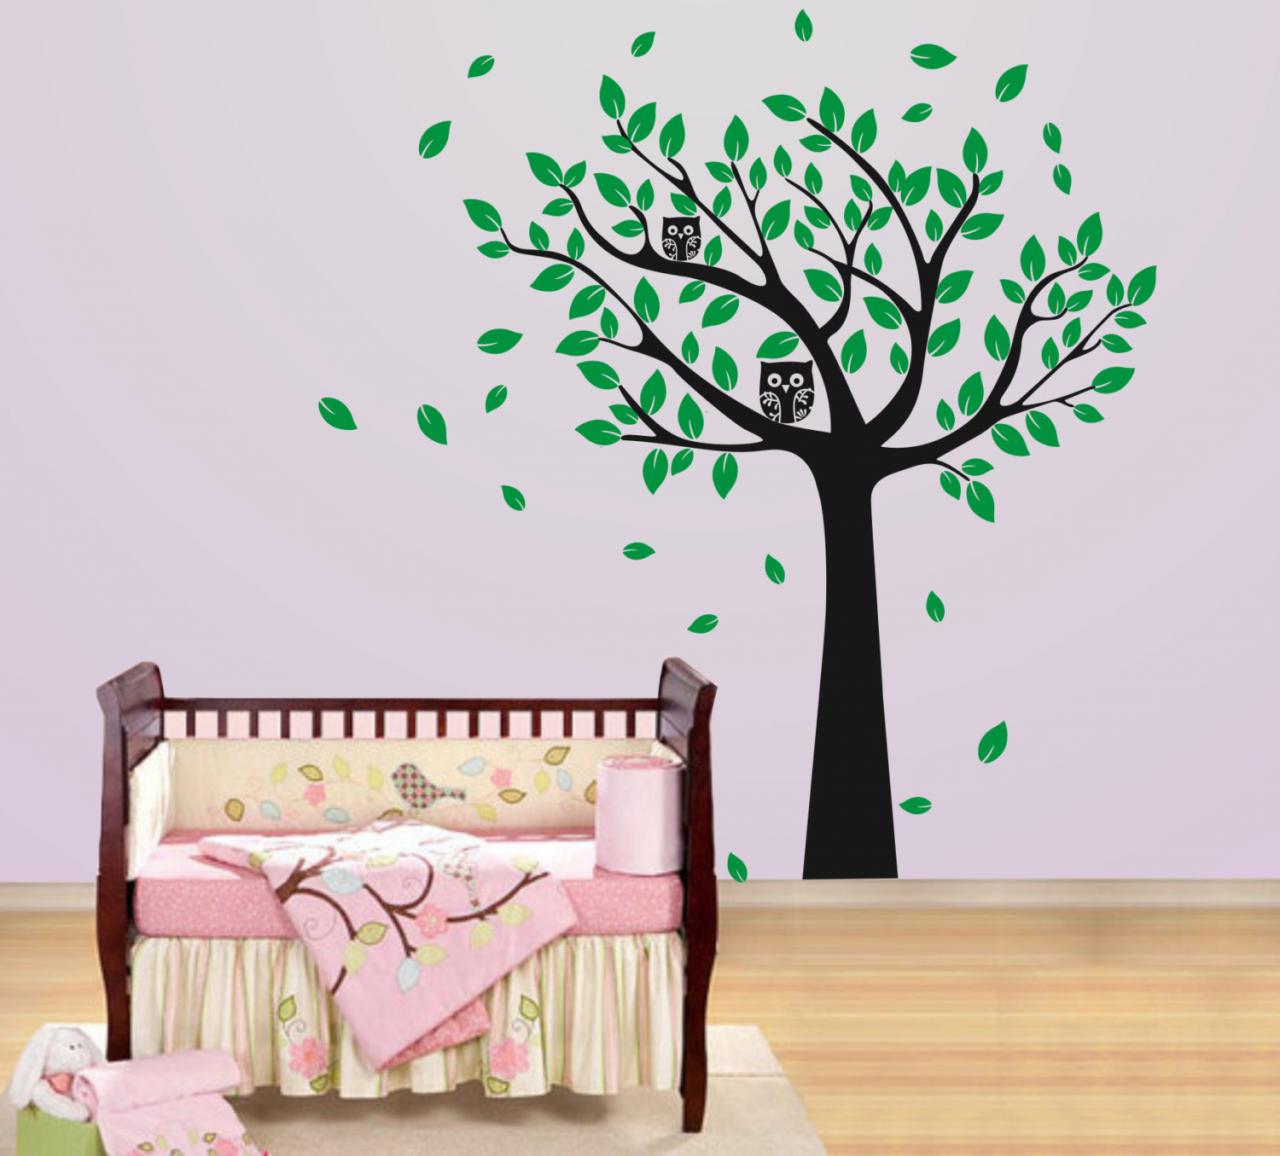 Vinyl Wall Decal Cute Owl On Tree Leaf Leaves Mom And Baby Owls Trees Home House Art Wall Decals Wall Sticker Stickers Baby Room Kid R567